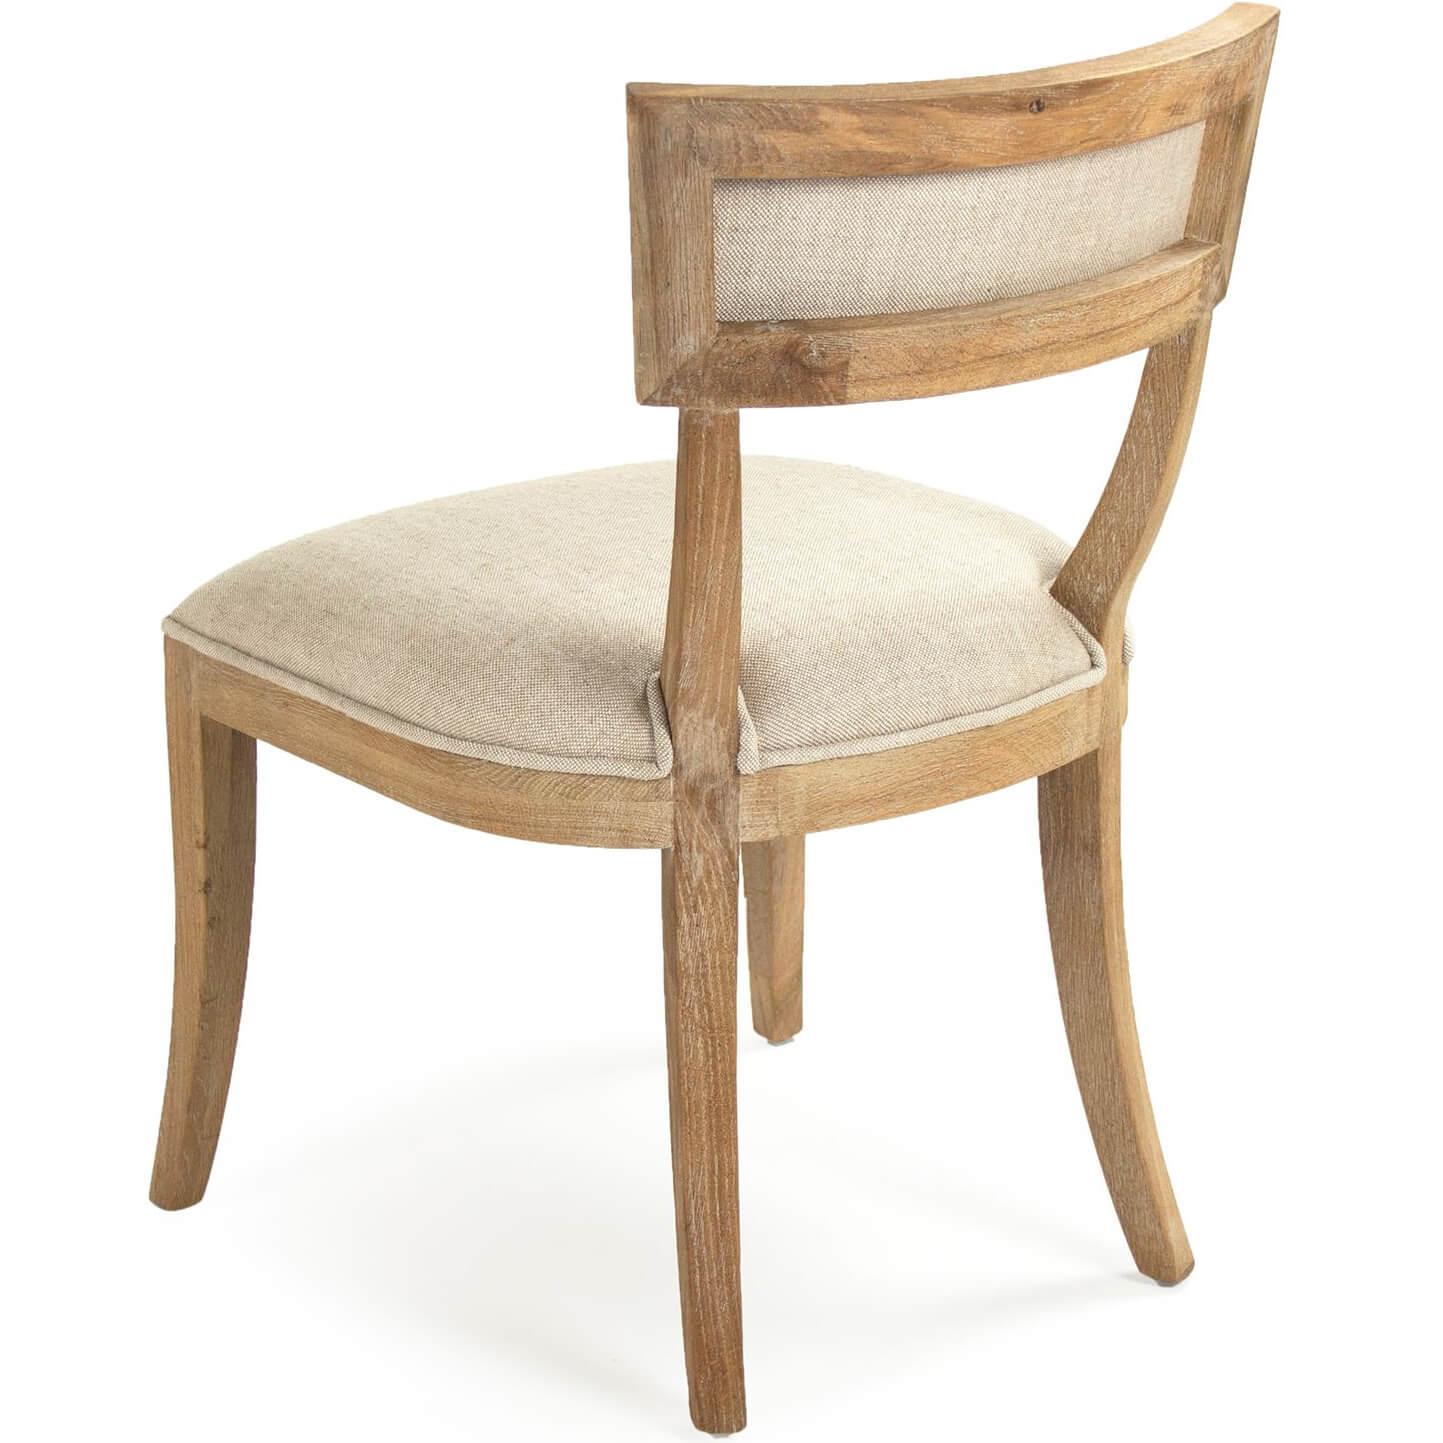 French Linen Curved Back Chairs - Belle Escape